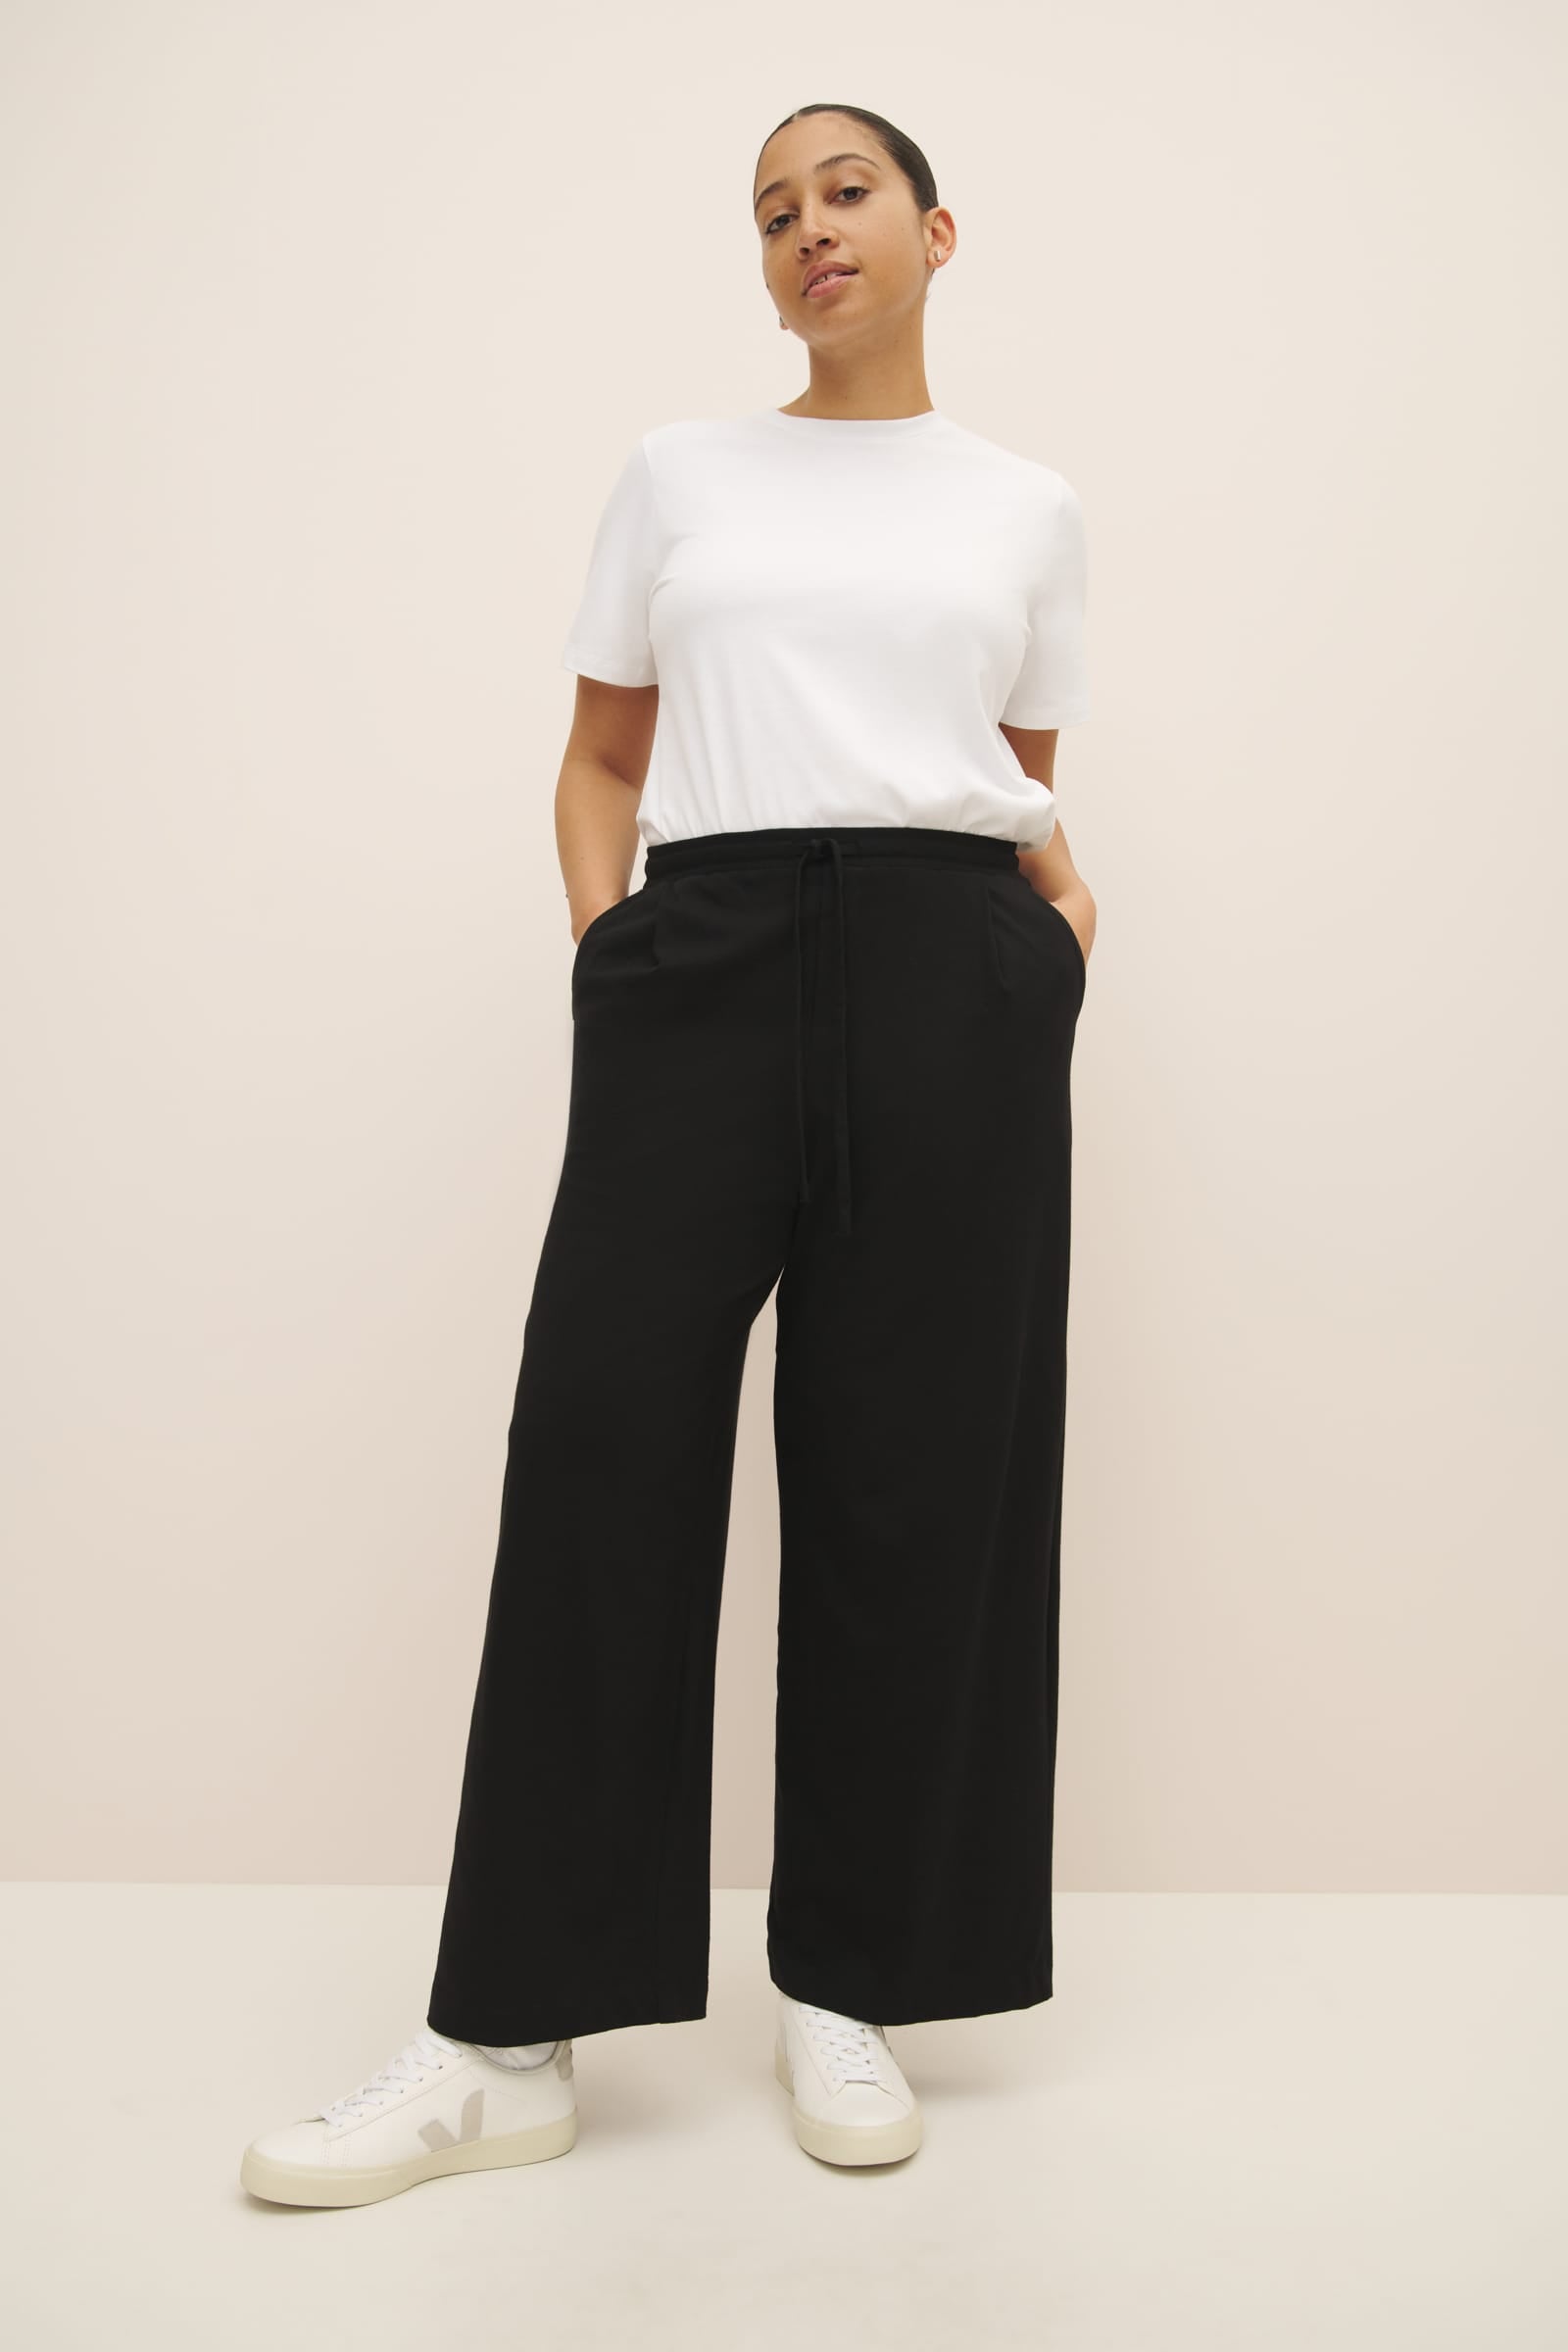 The Assembly Line : High Waisted Trouser Pattern – the workroom